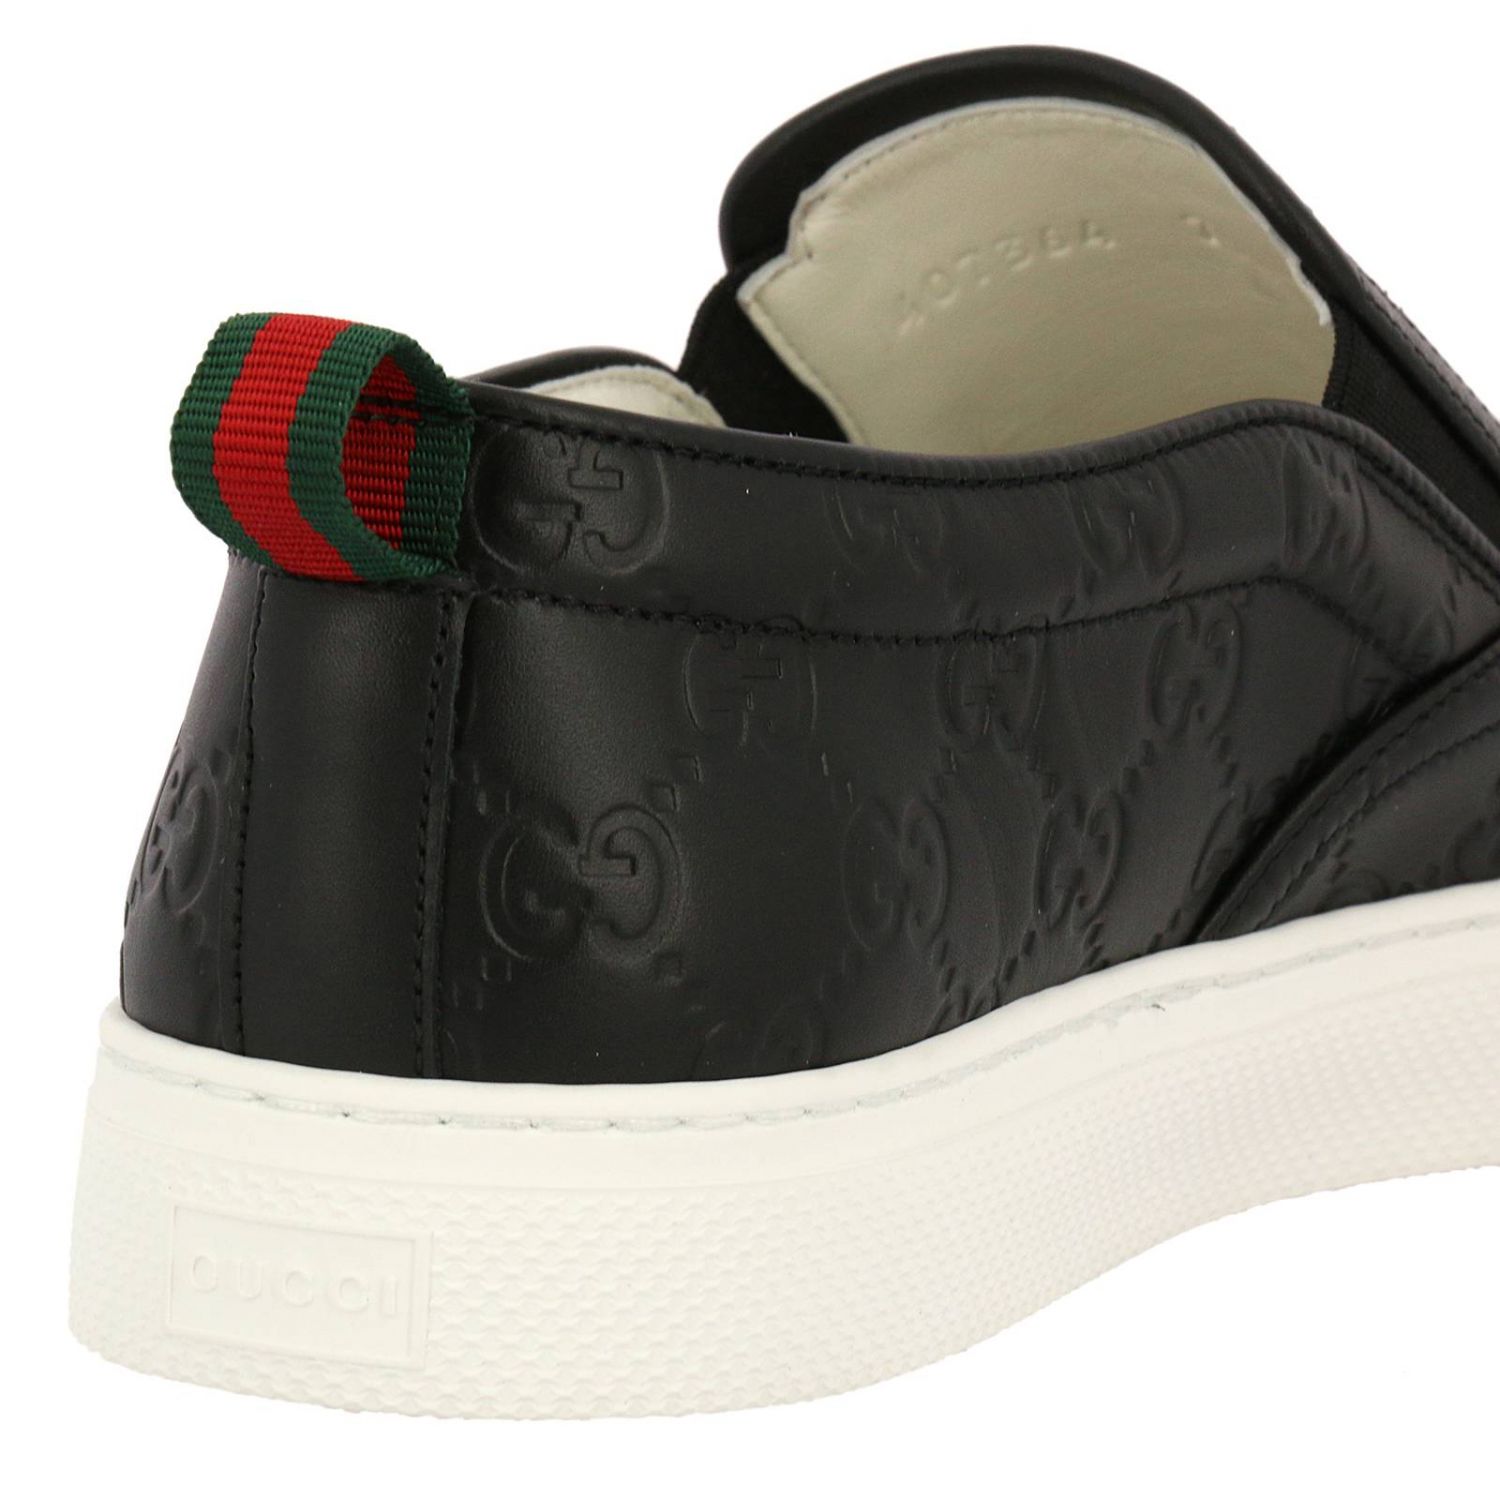 Are Mens Gucci Shoes True To Size - Best Design Idea